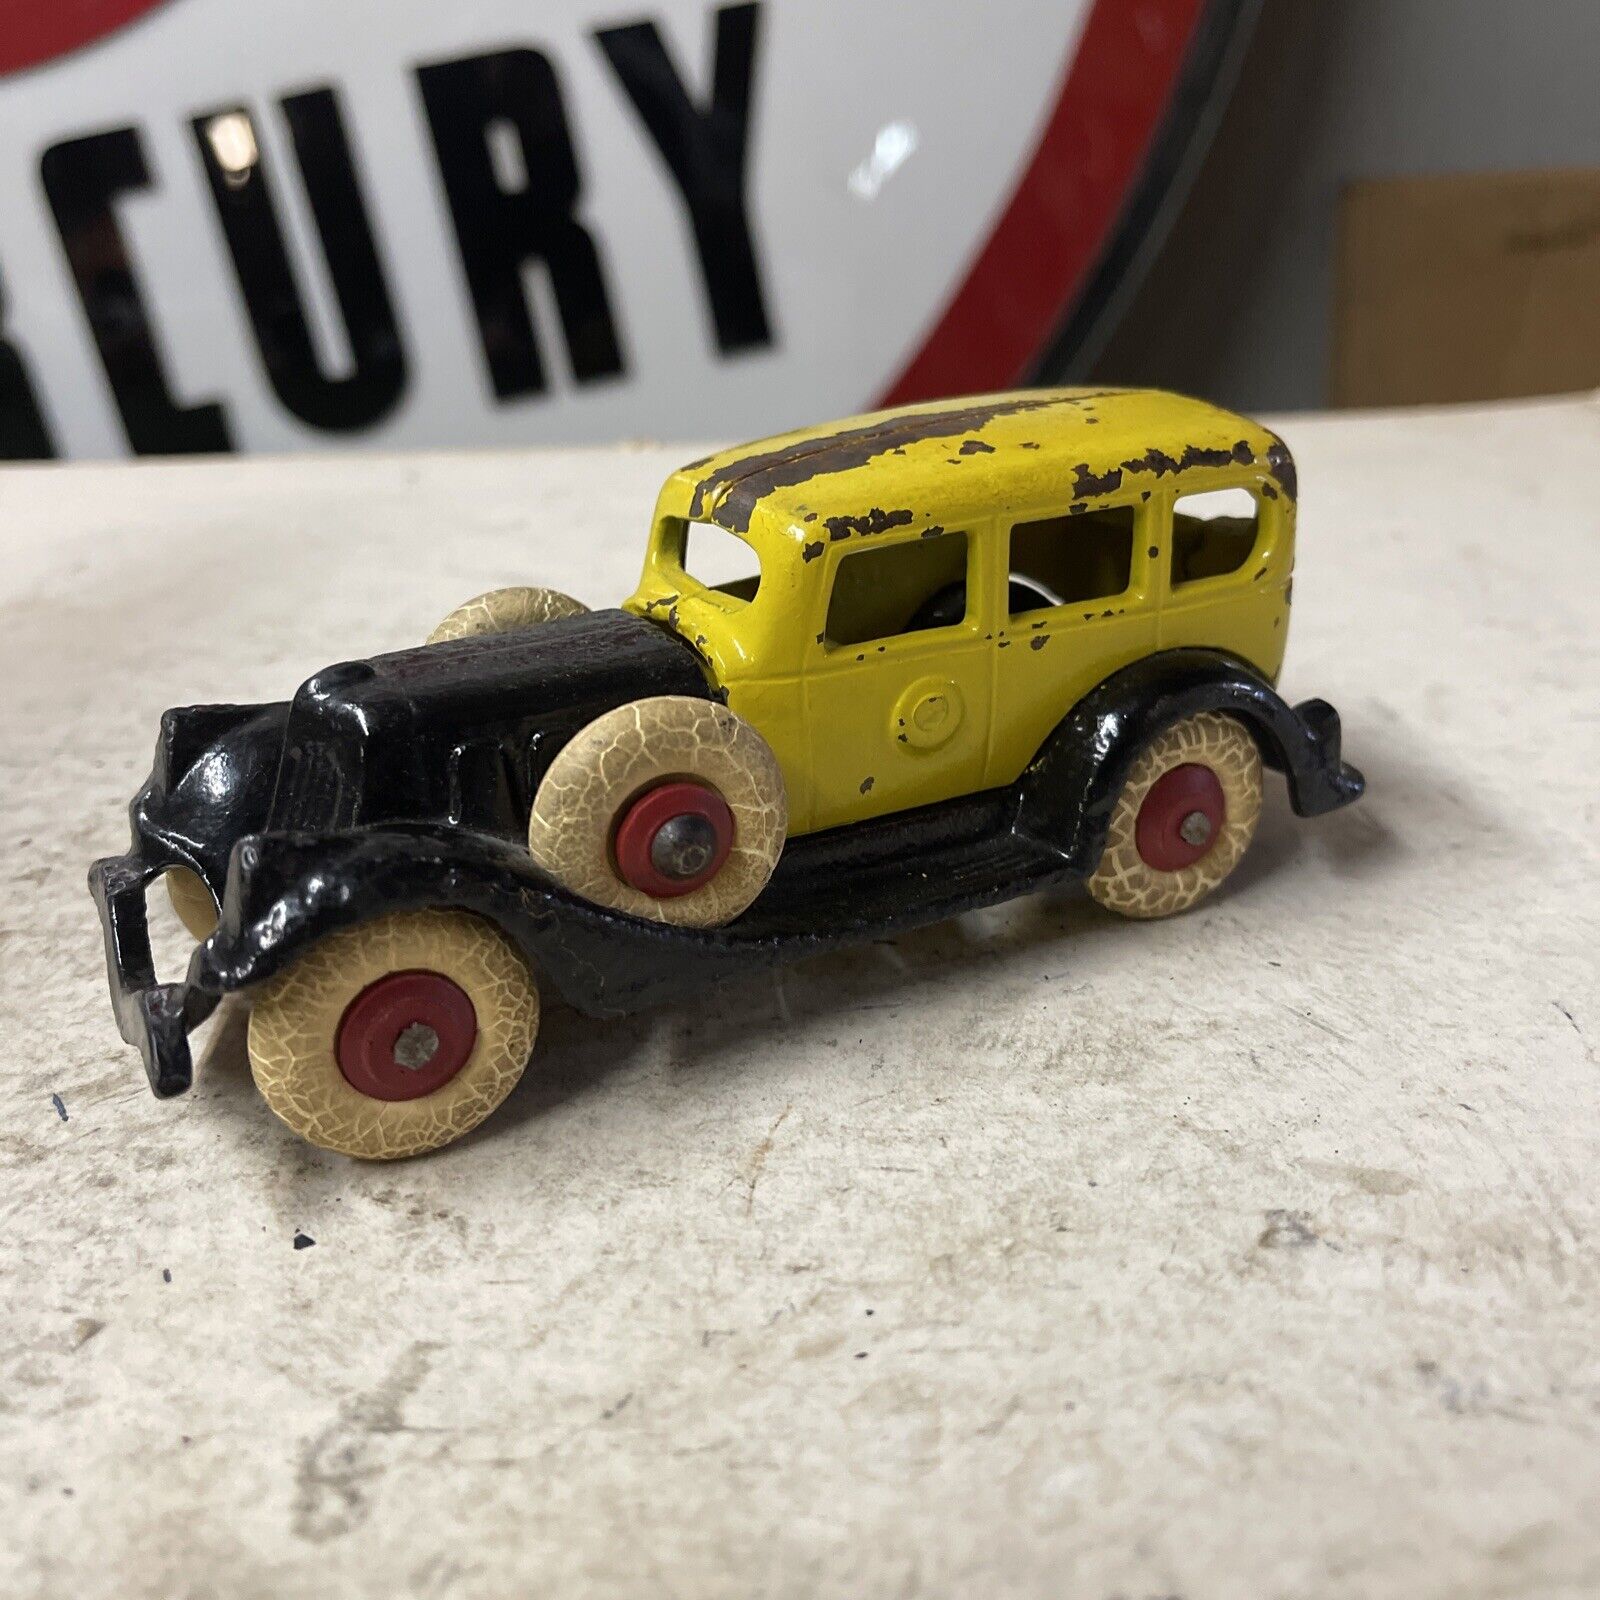 1930s CAST IRON SALOON CAR TOY IN ORIGINAL PAINT ARCADE HUBLEY ?